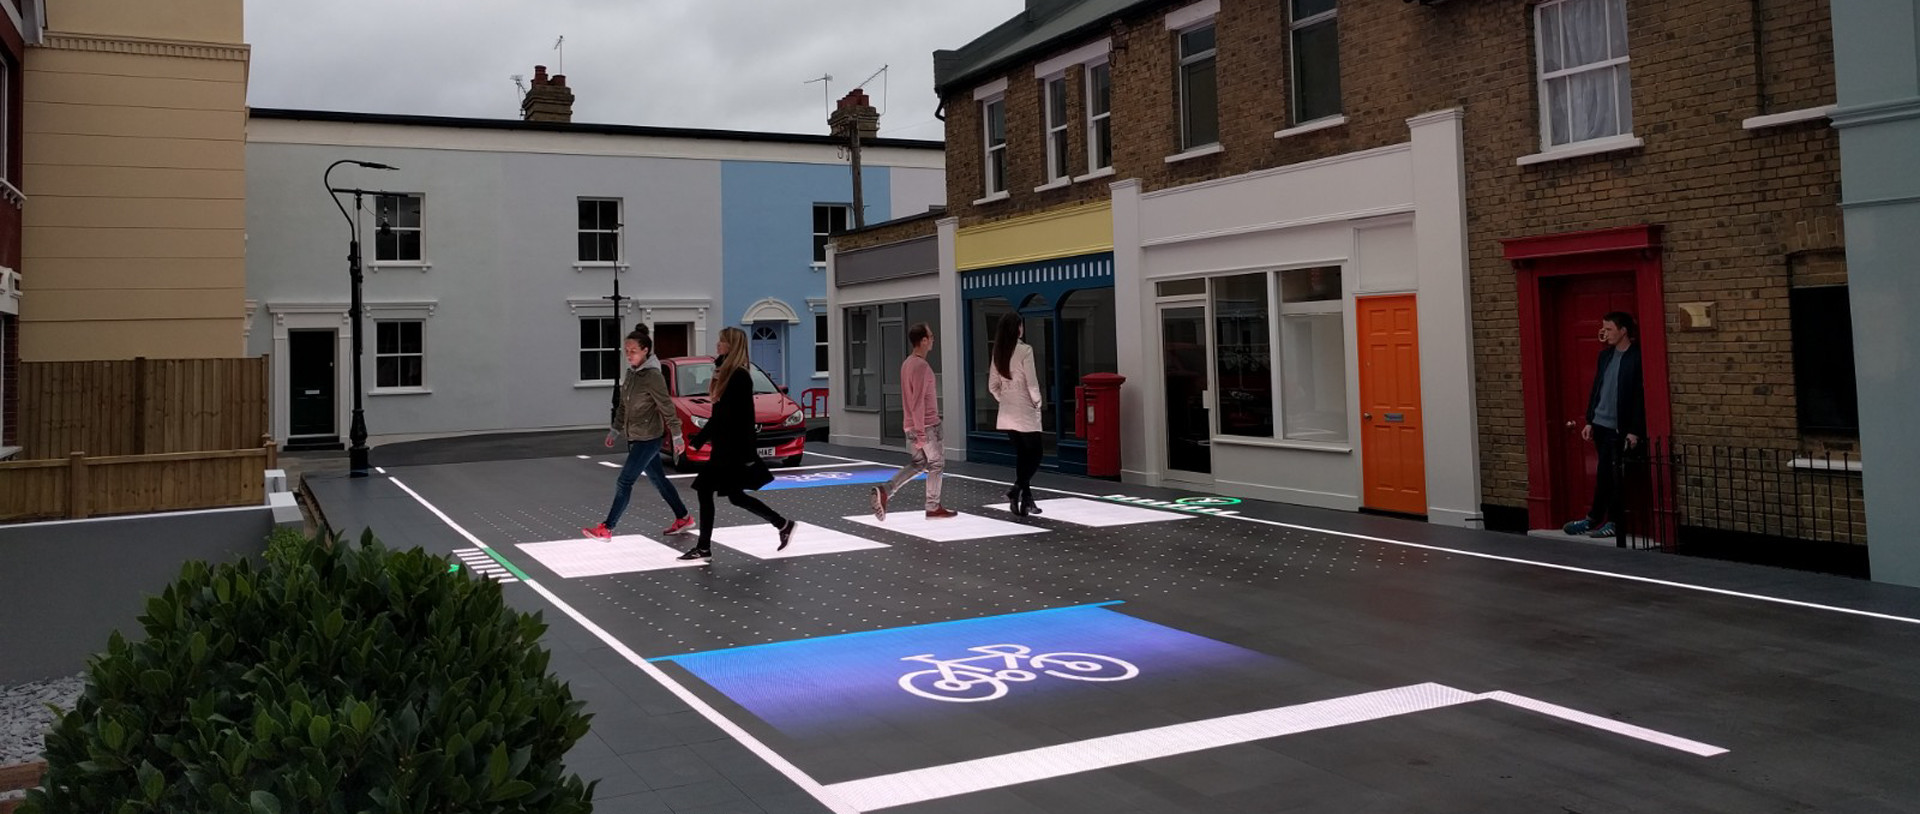 a-digital-zebra-crossing-could-be-the-future-of-our-roads